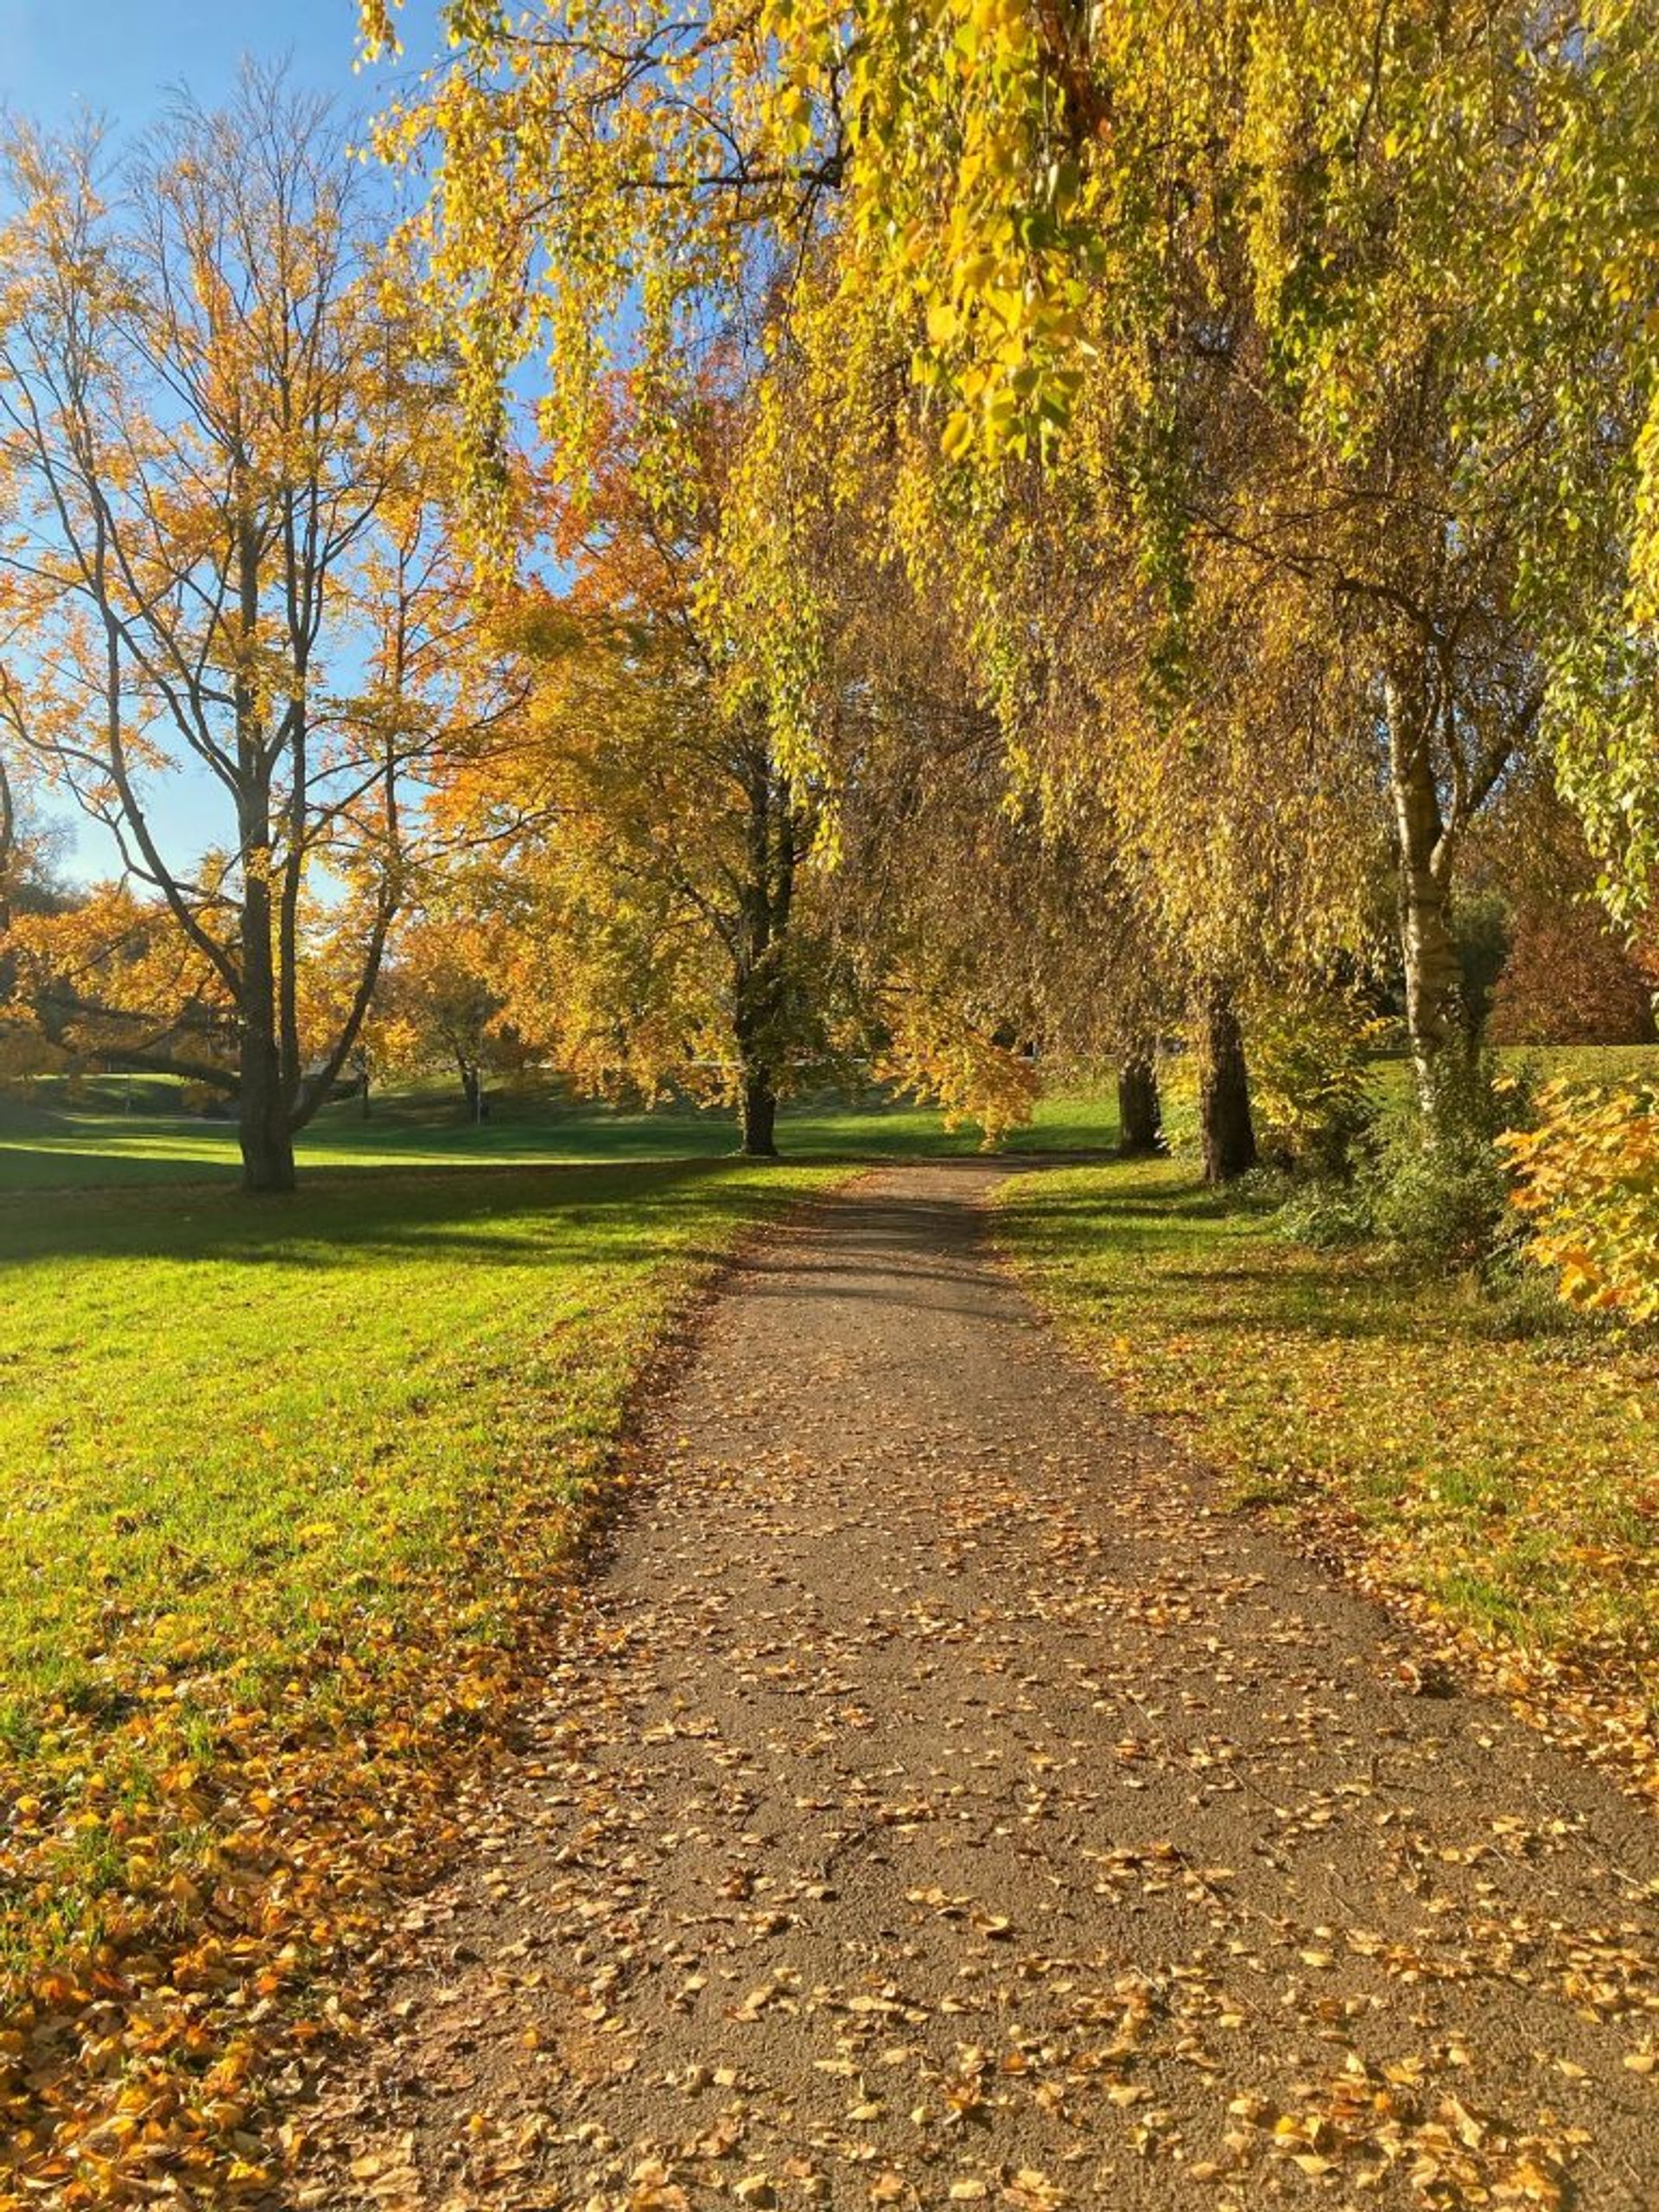 A pathway through a park covered with yellow leaves and yellow trees all around.  